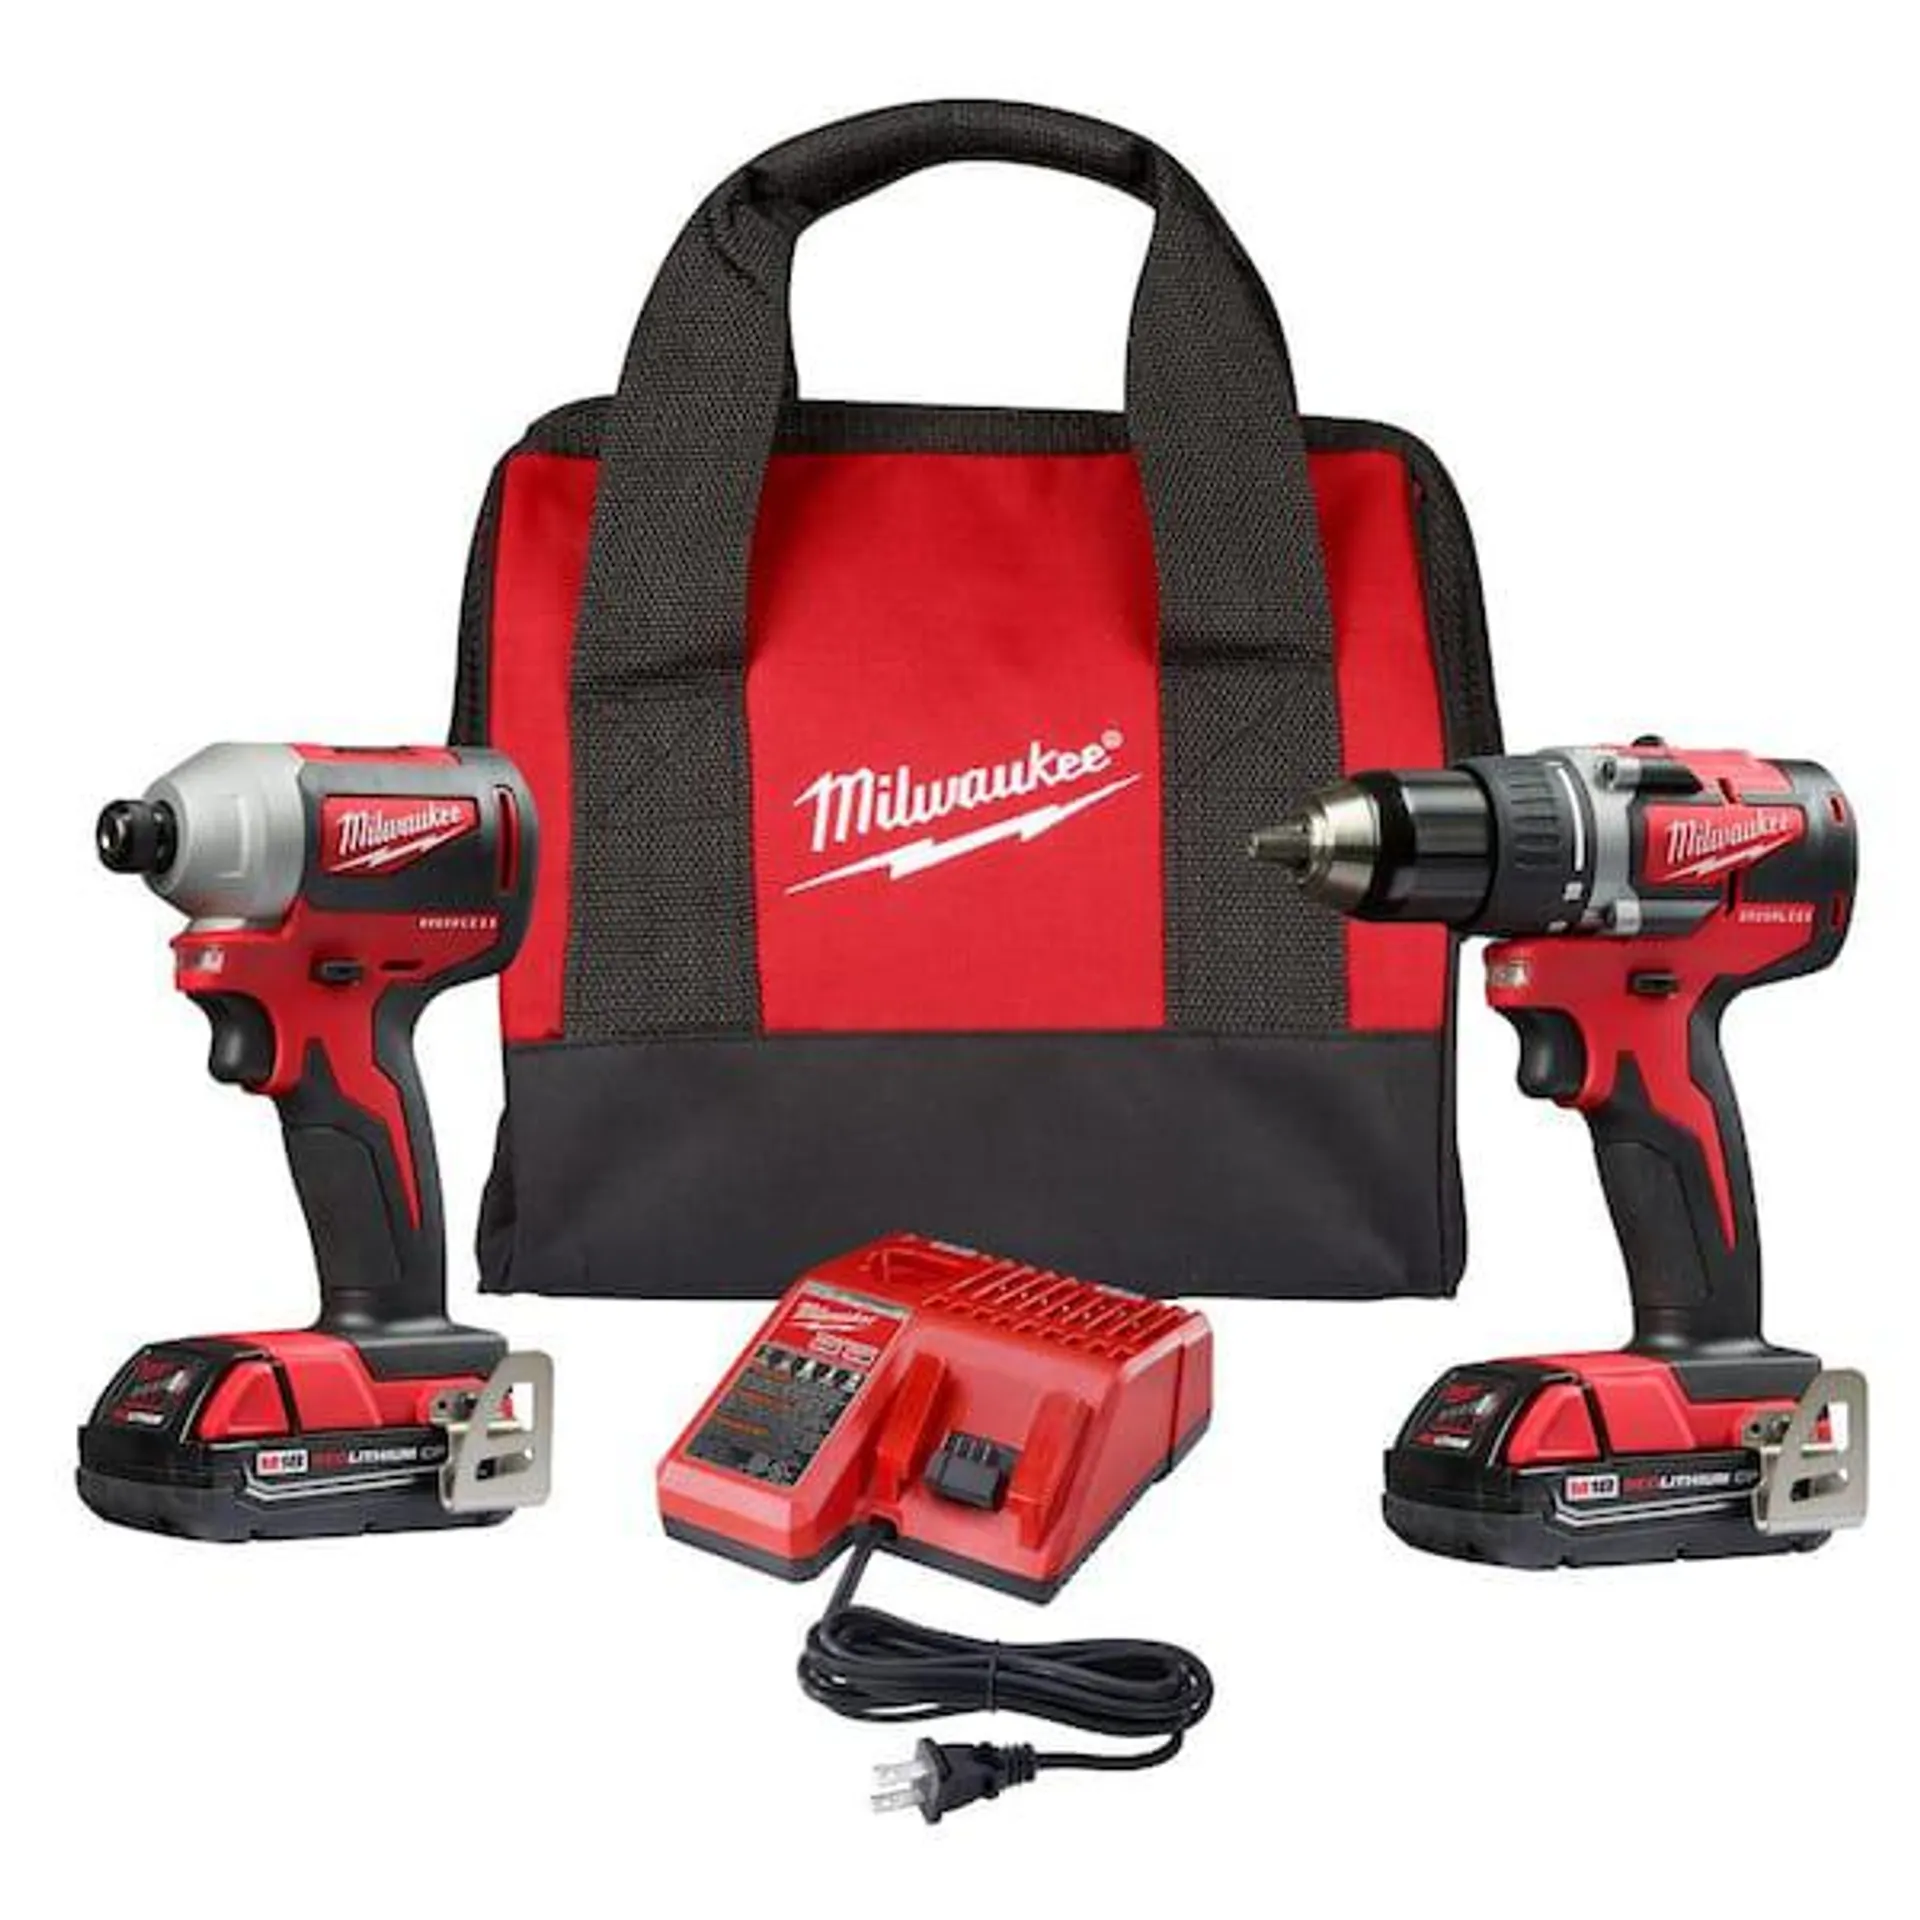 M18 18V Lithium-Ion Brushless Cordless Compact Drill/Impact Combo Kit (2-Tool) W/ (2) 2.0Ah Batteries, Charger & Bag